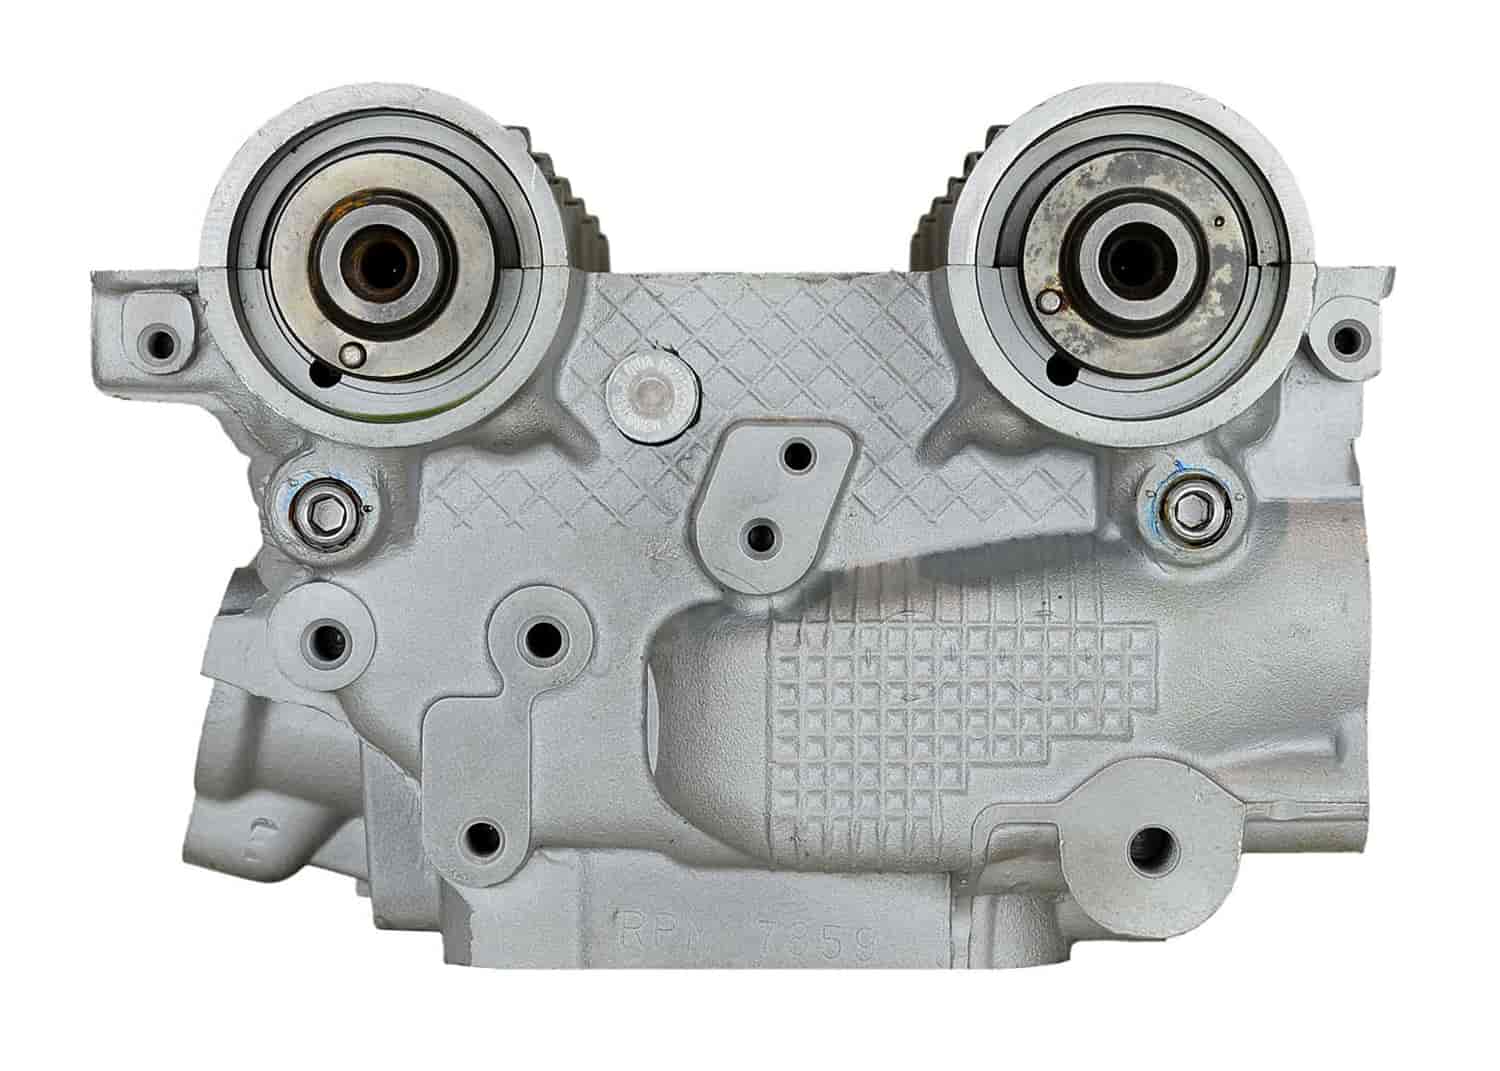 Remanufactured Cylinder Head for 1999-2002 Daewoo with 1.6L L4